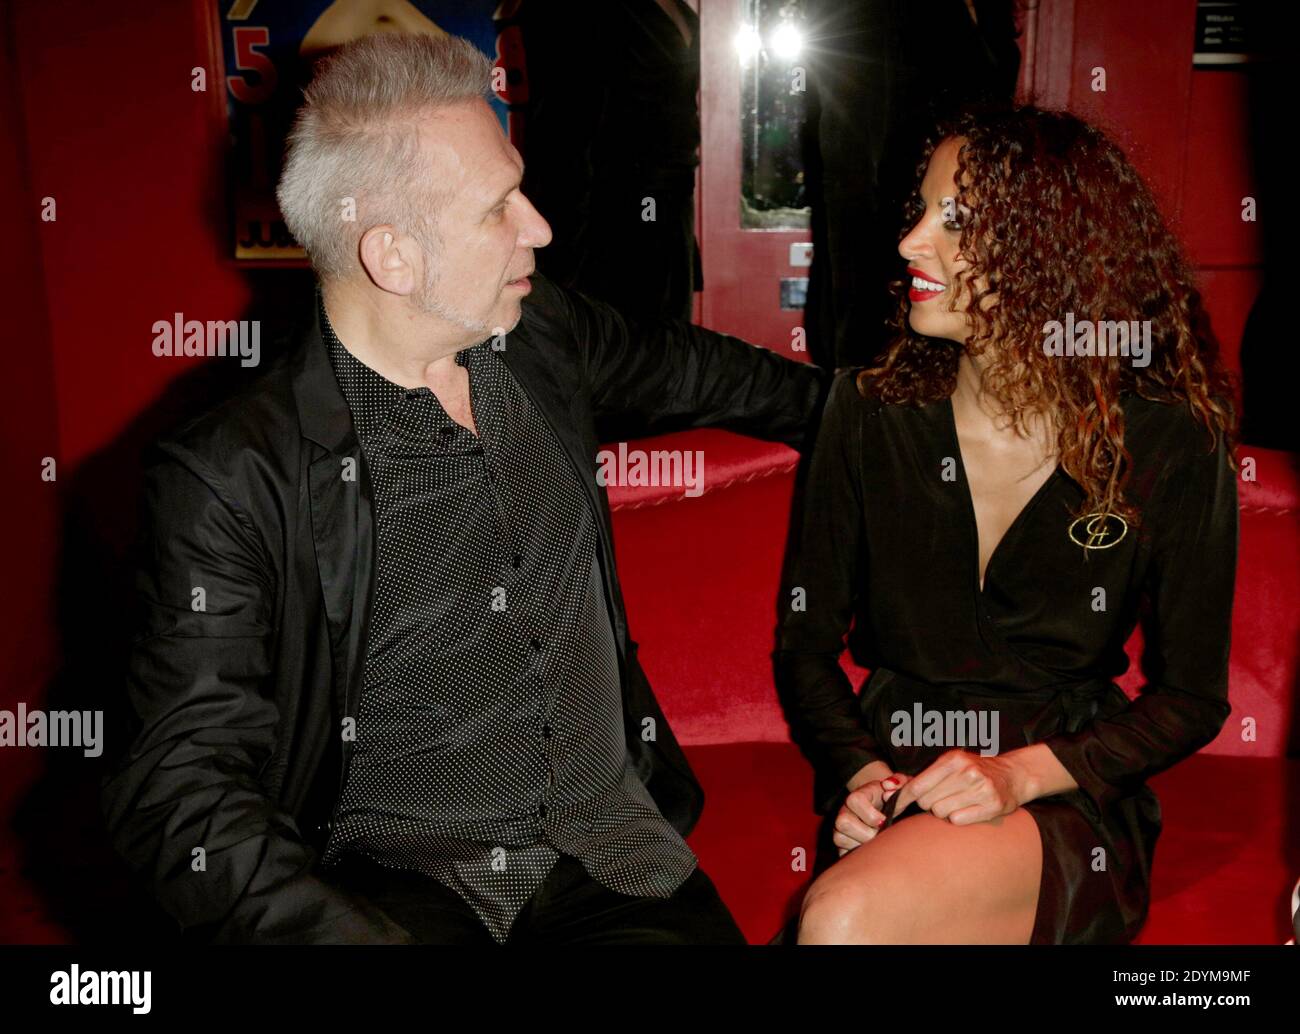 EXCLUSIVE - Jean-Paul Gaultier and Noemie Lenoir pose backstage after  Noemie Lenoir's show at Crazy Horse, in Paris, France, on June 5, 2013.  Photo by Jerome Domine/ABACAPRESS.COM Stock Photo - Alamy